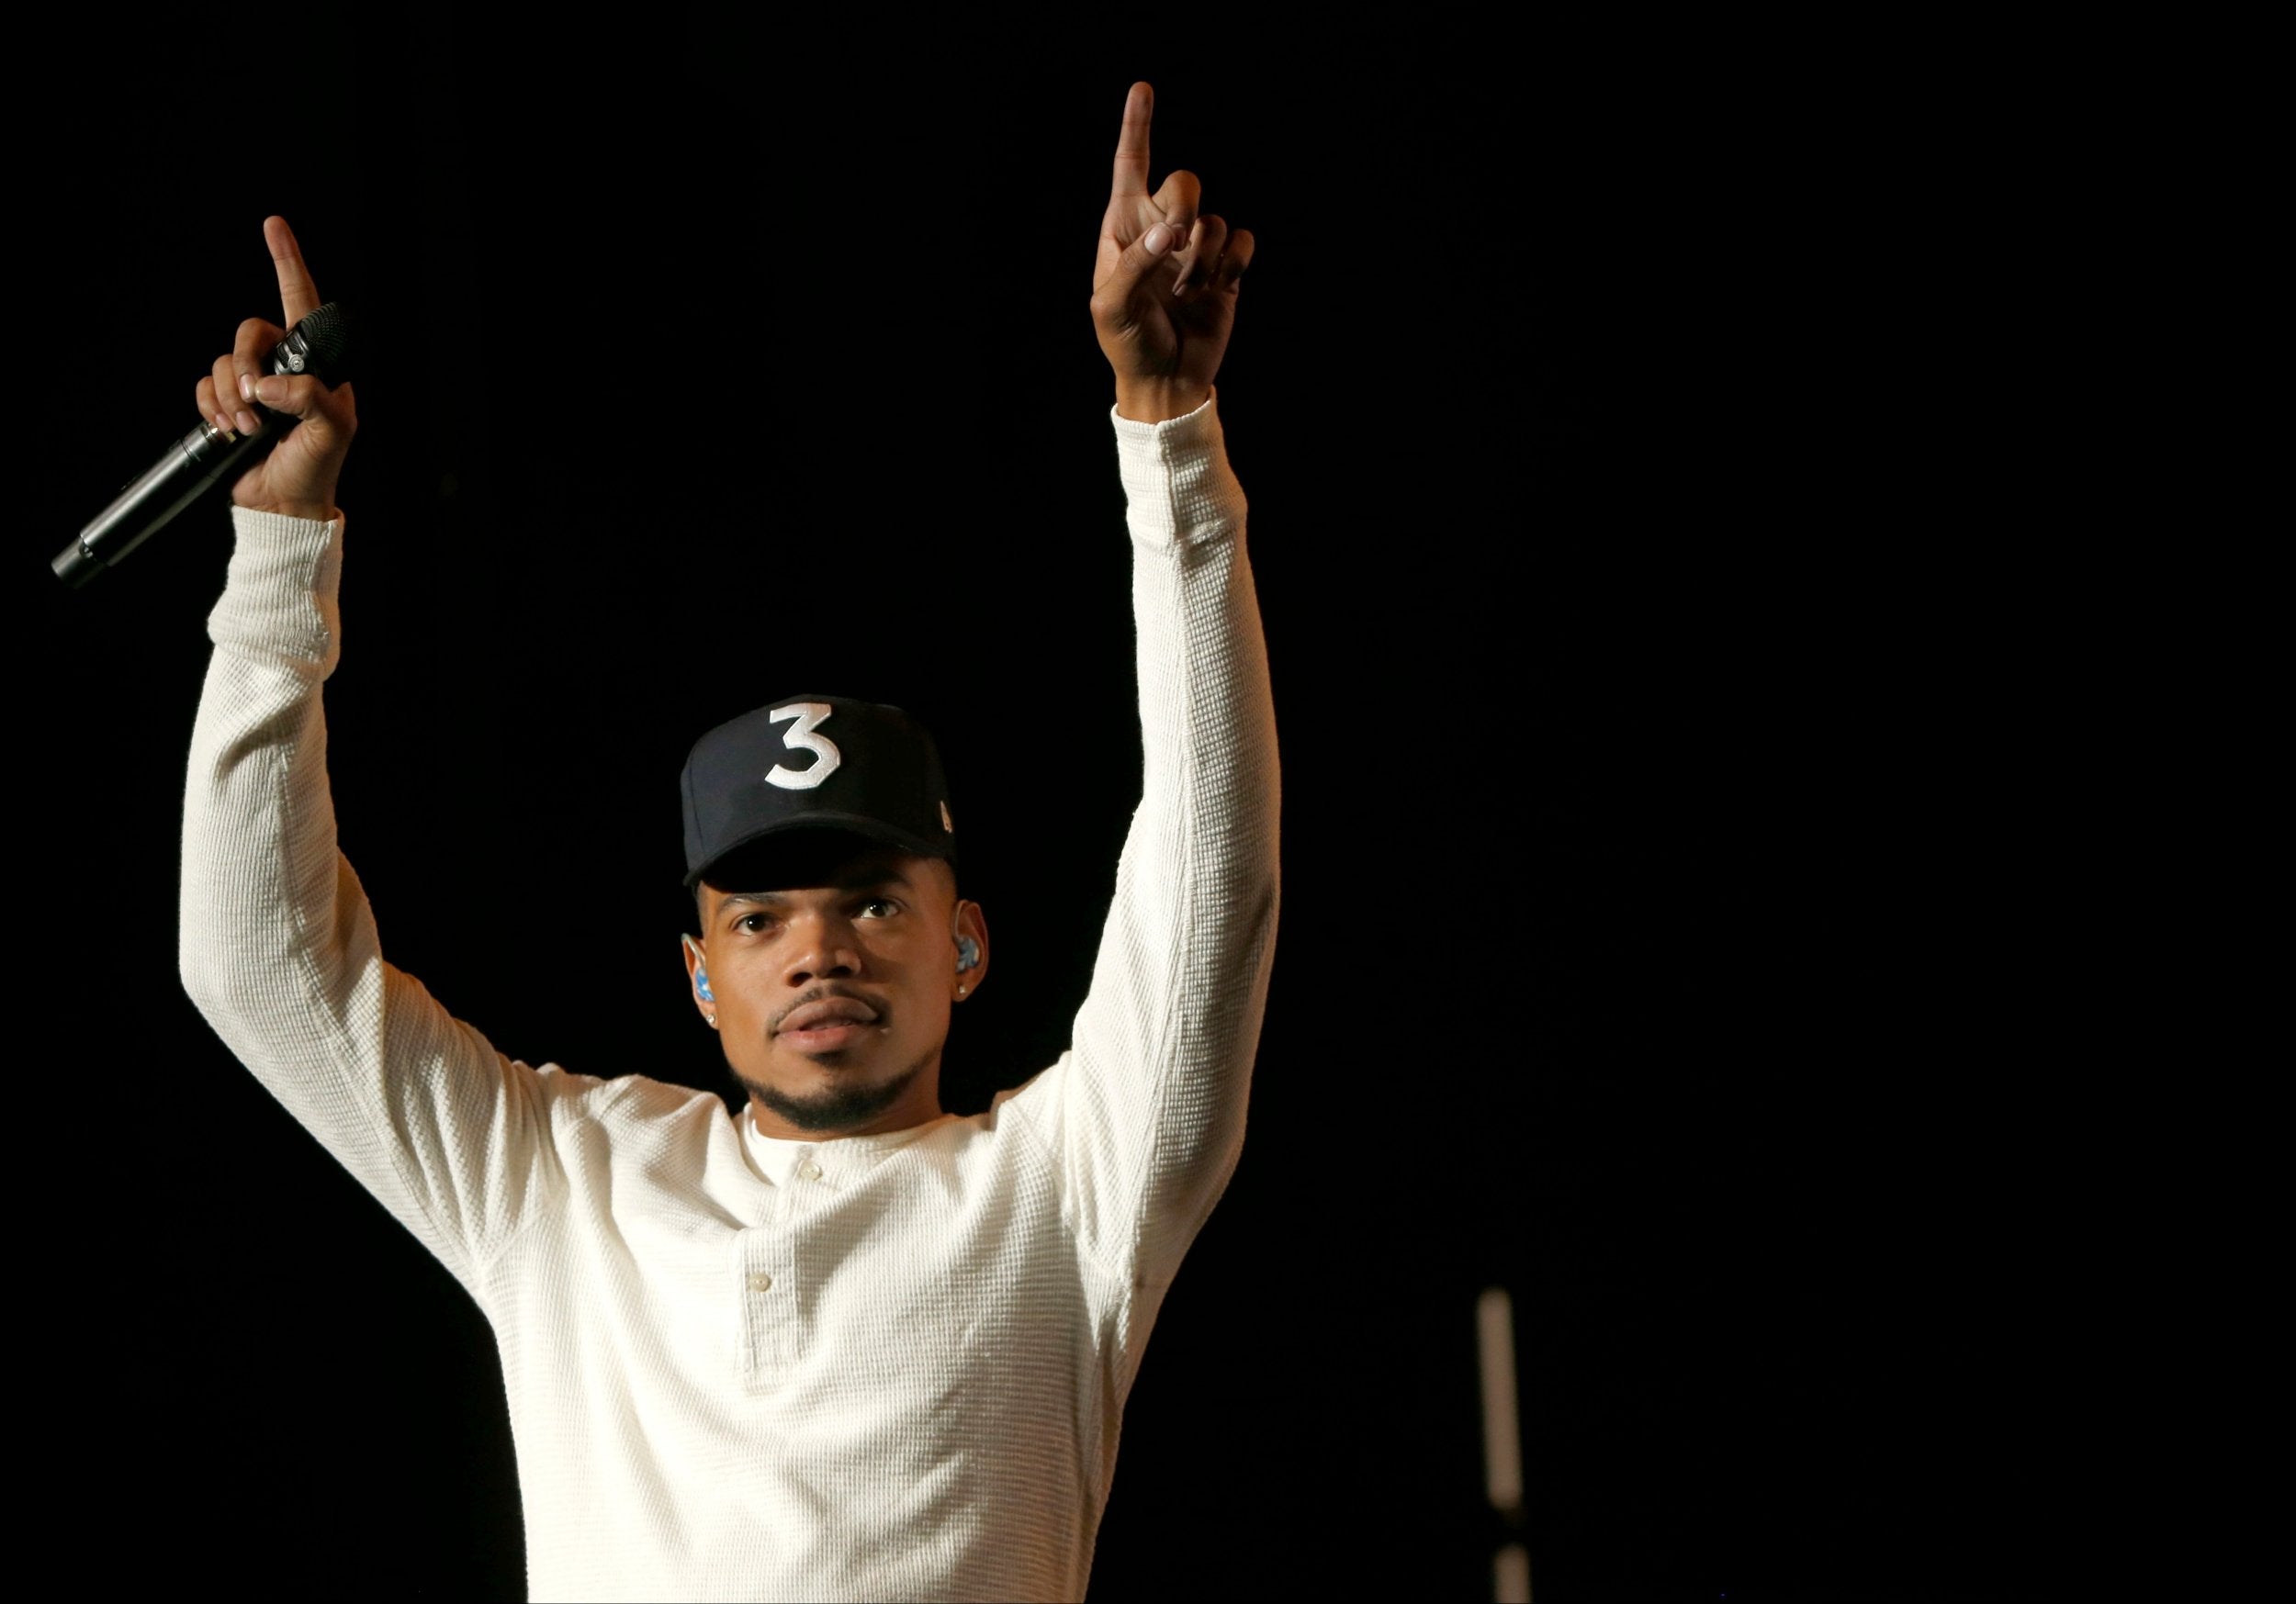 Chance the Rapper has hinted that he may run for mayor in his native Chicago